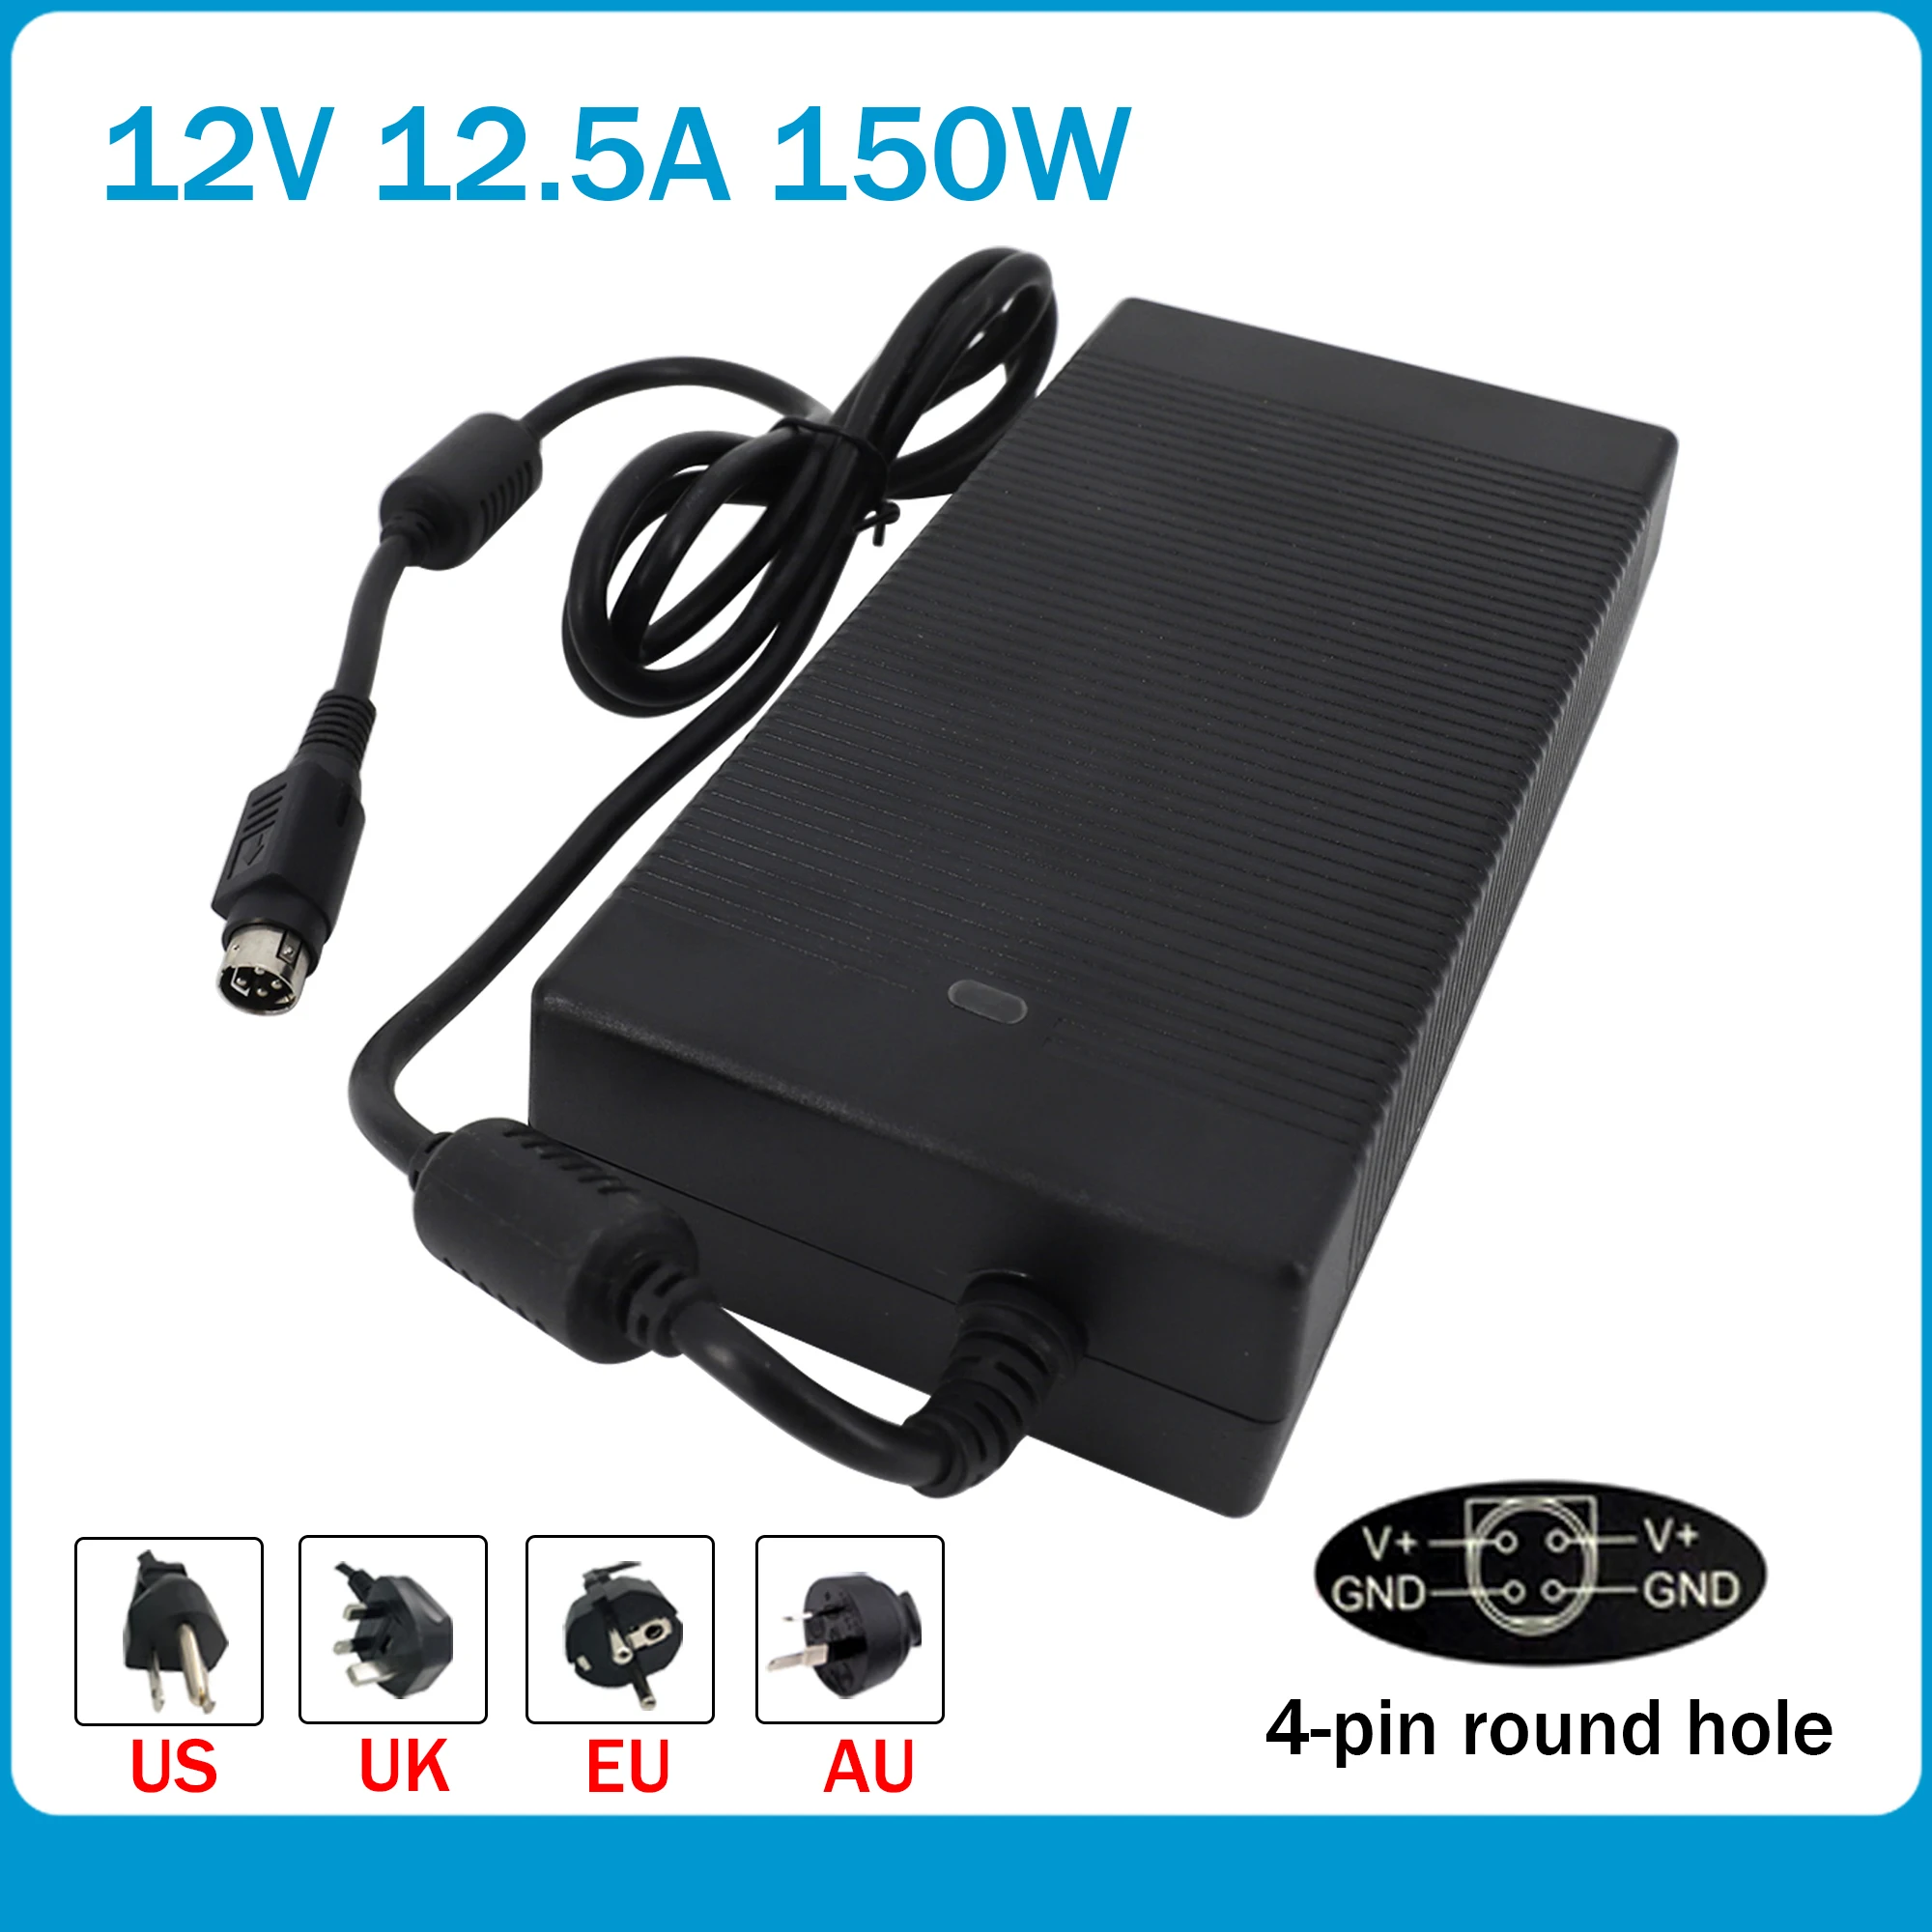 12v 12.5a 150w FSP ac power supply charger adapter for QNAP TS-412 NAS TS-410 DPS-150NB-1B FSP150-AHAN1 Laptop adapter